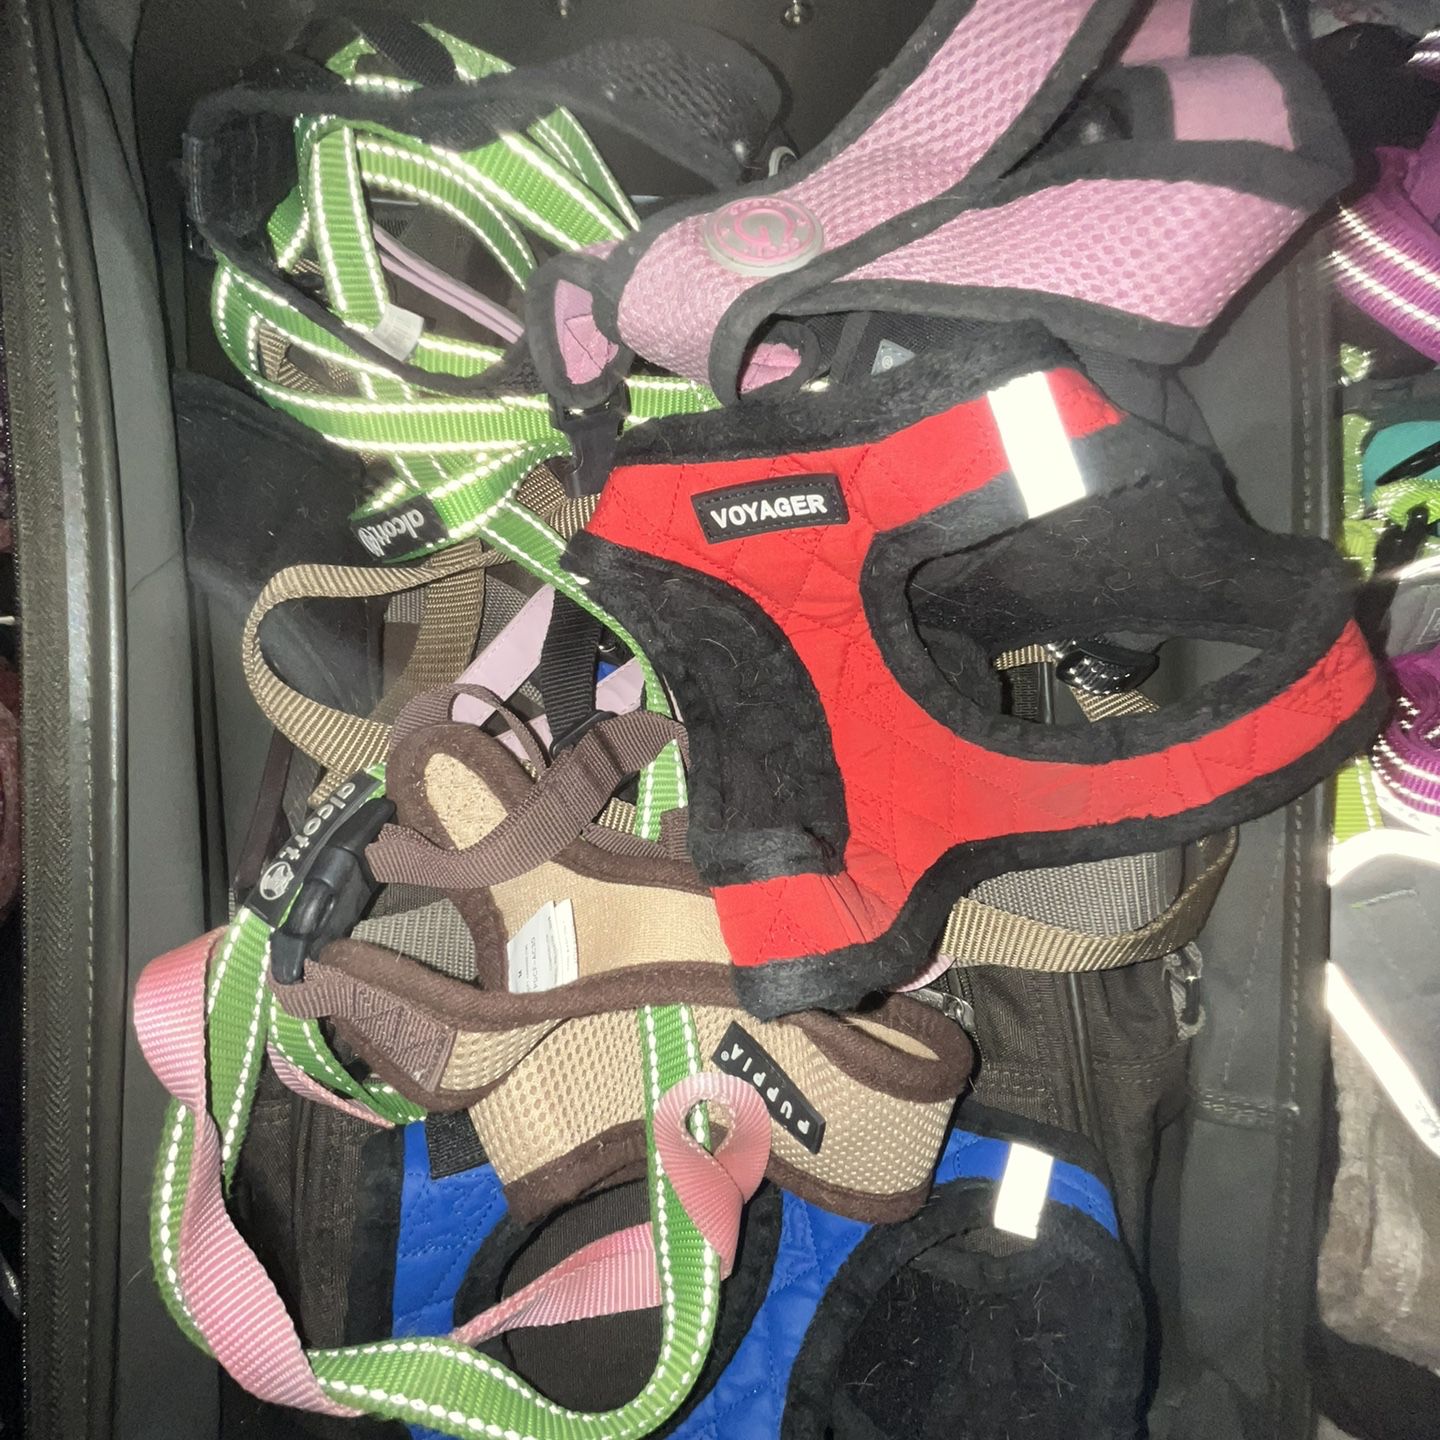 LV dog Harness for Sale in Bronx, NY - OfferUp